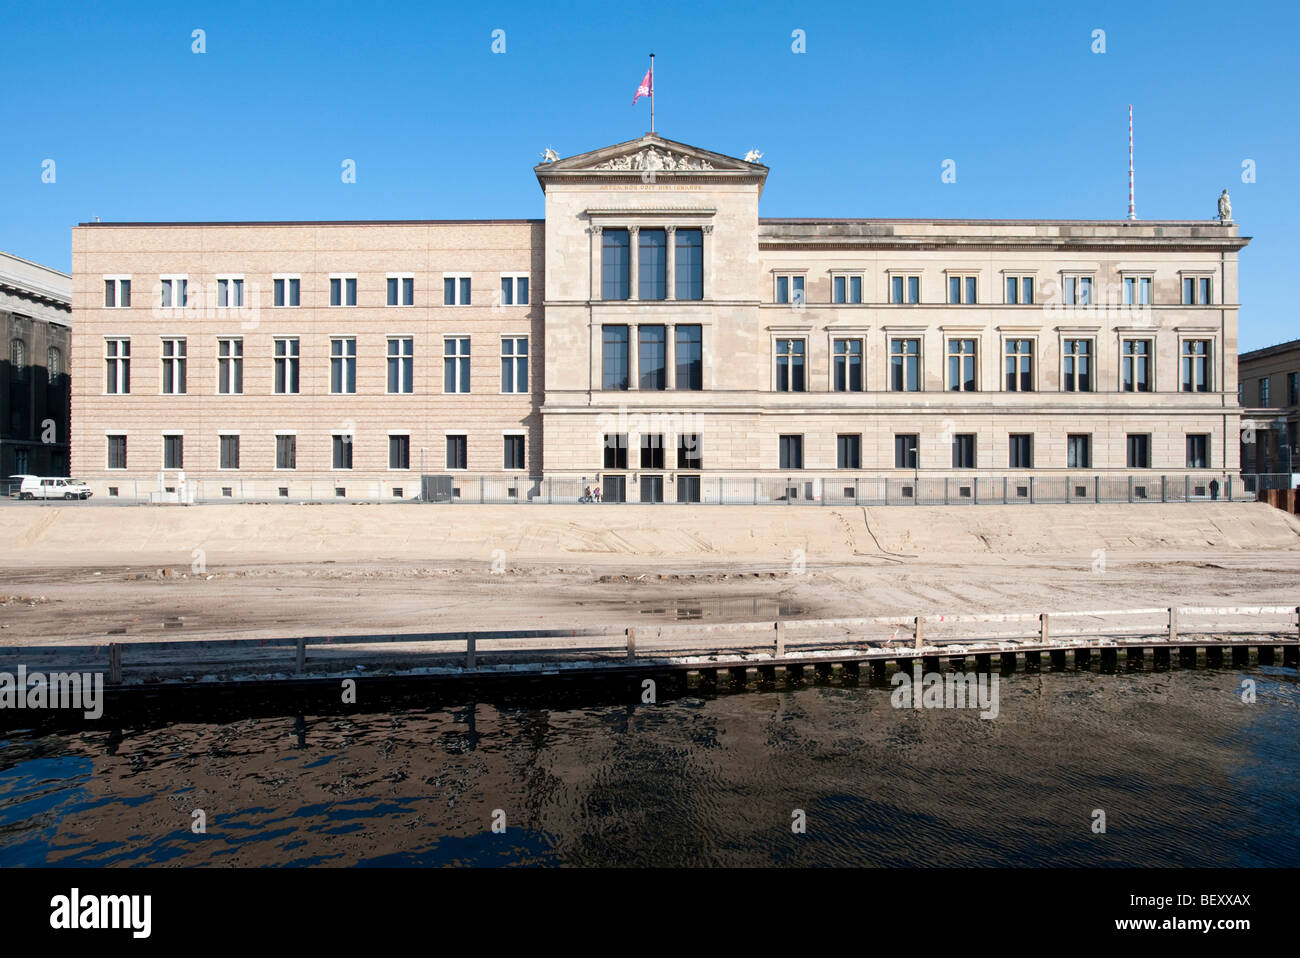 Neues Museum or New Museum on Museumsinsel or Museum Island in Berlin Stock Photo